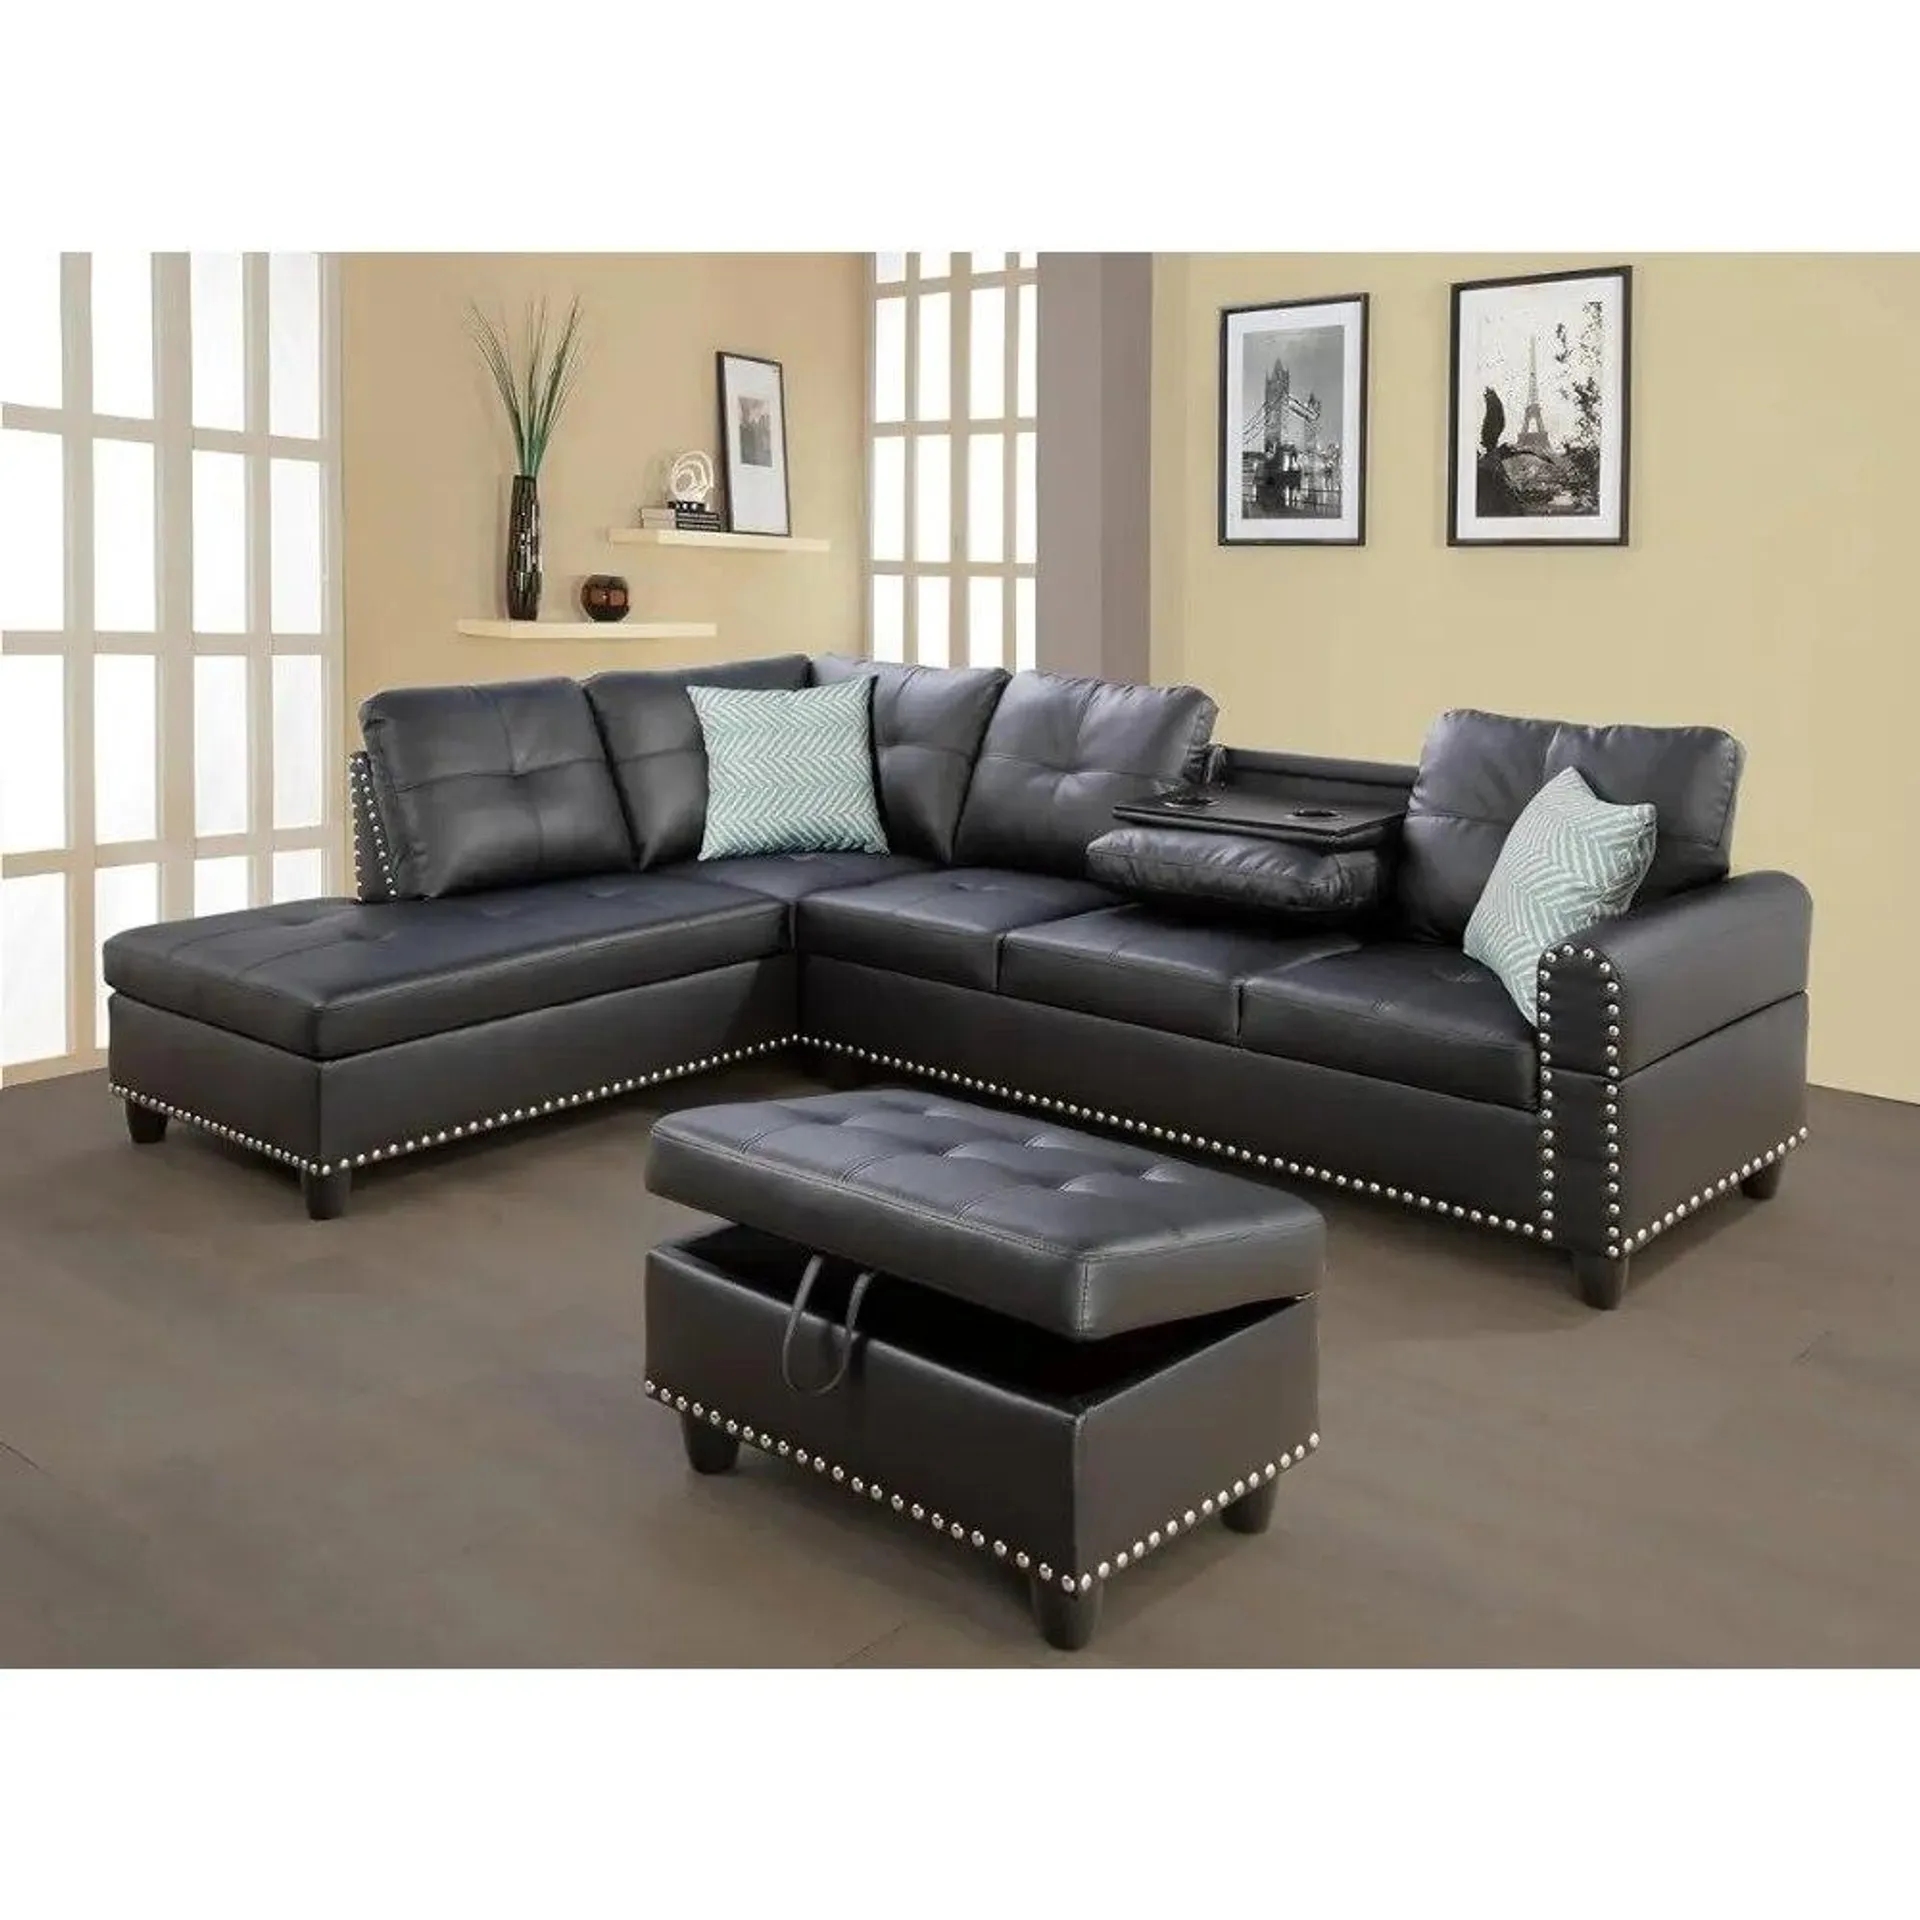 Living room sofa L-shaped 6-seater, spacious with removable ottoman, faux leather upholstered sectional sofa